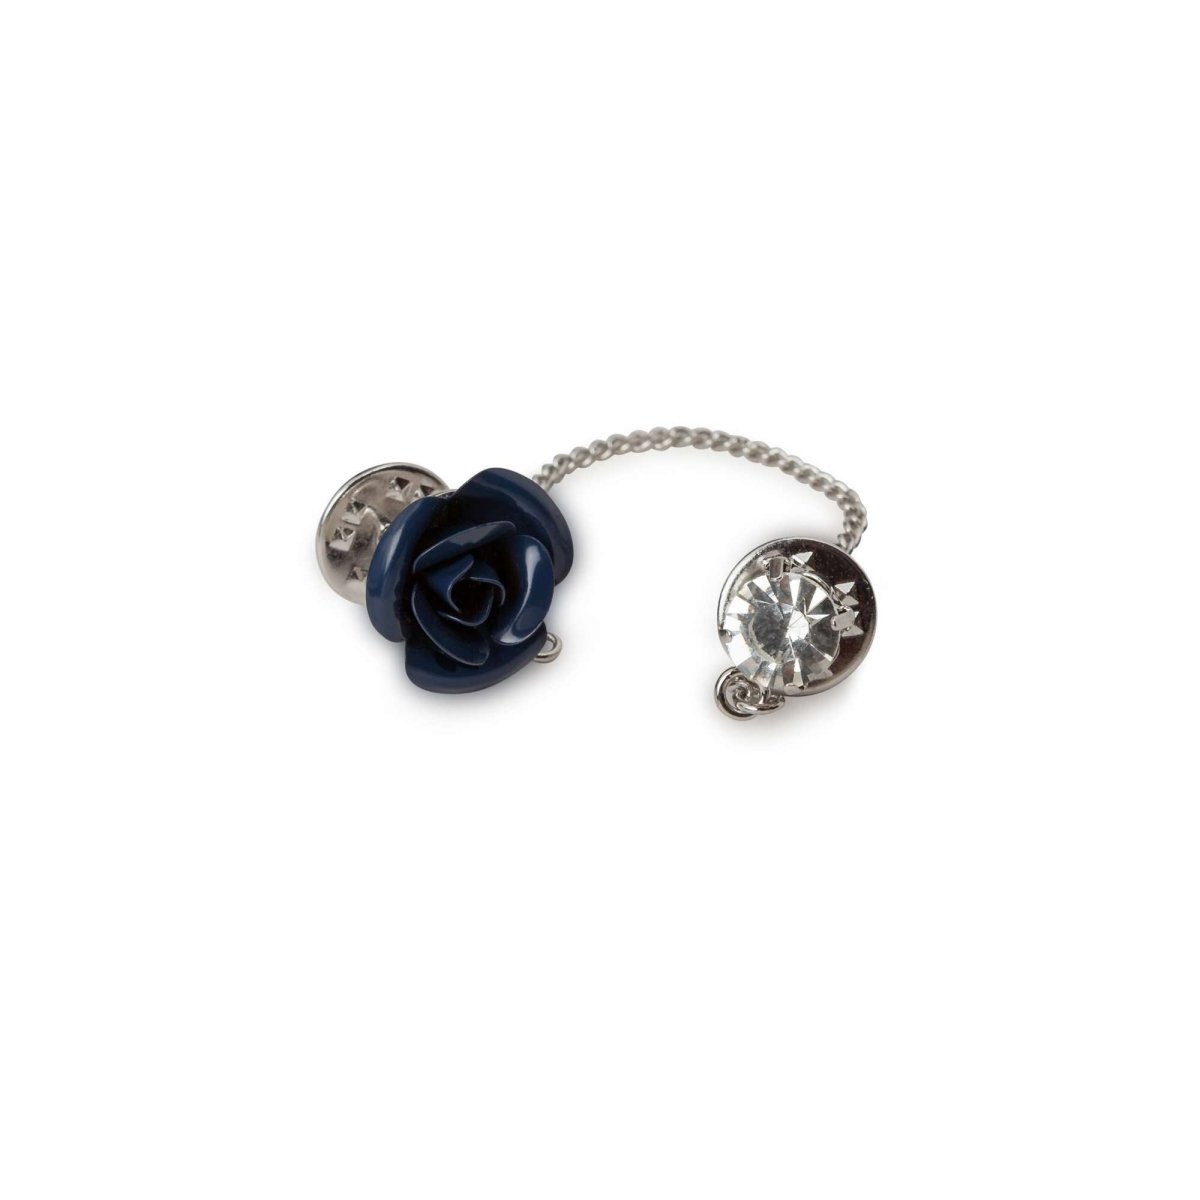 Navy Flower with Chain Lapel Pin - MenSuits